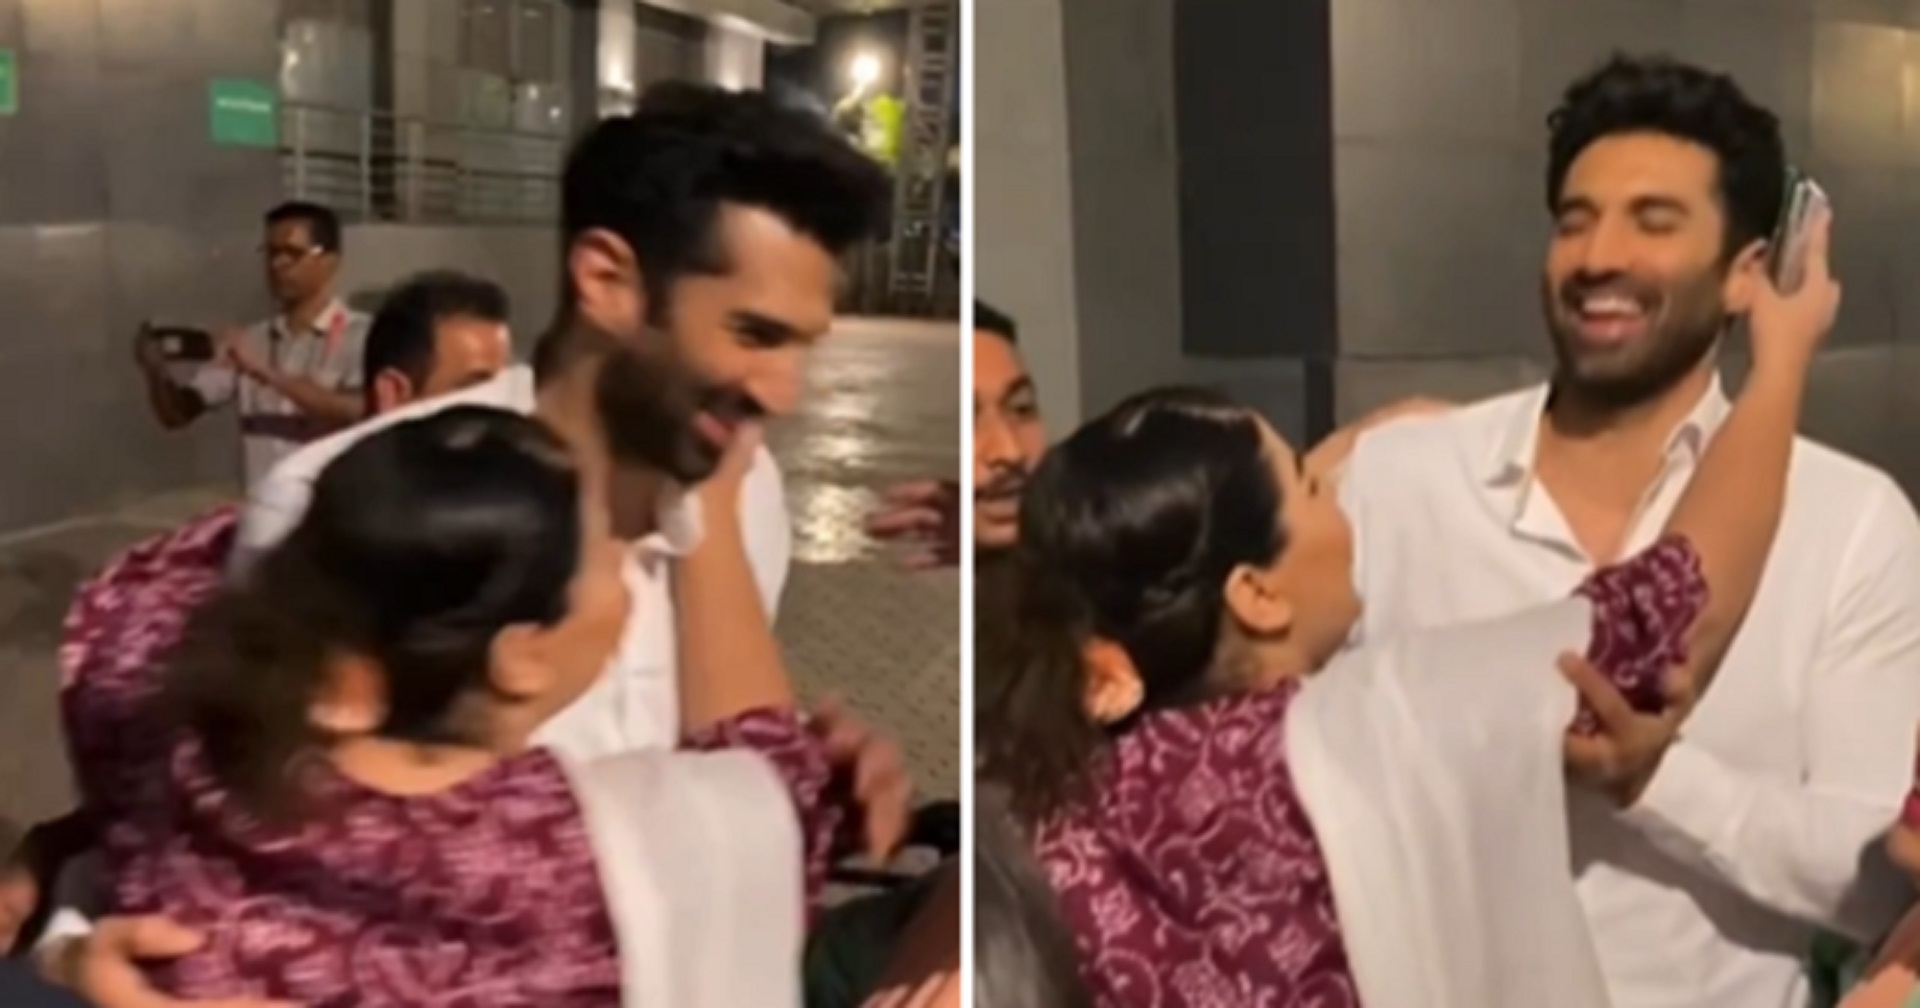 Watch : Fan Tries To Forcibly Kiss Actor Aditya Roy Kapur, Internet Calls It ‘Harassment’